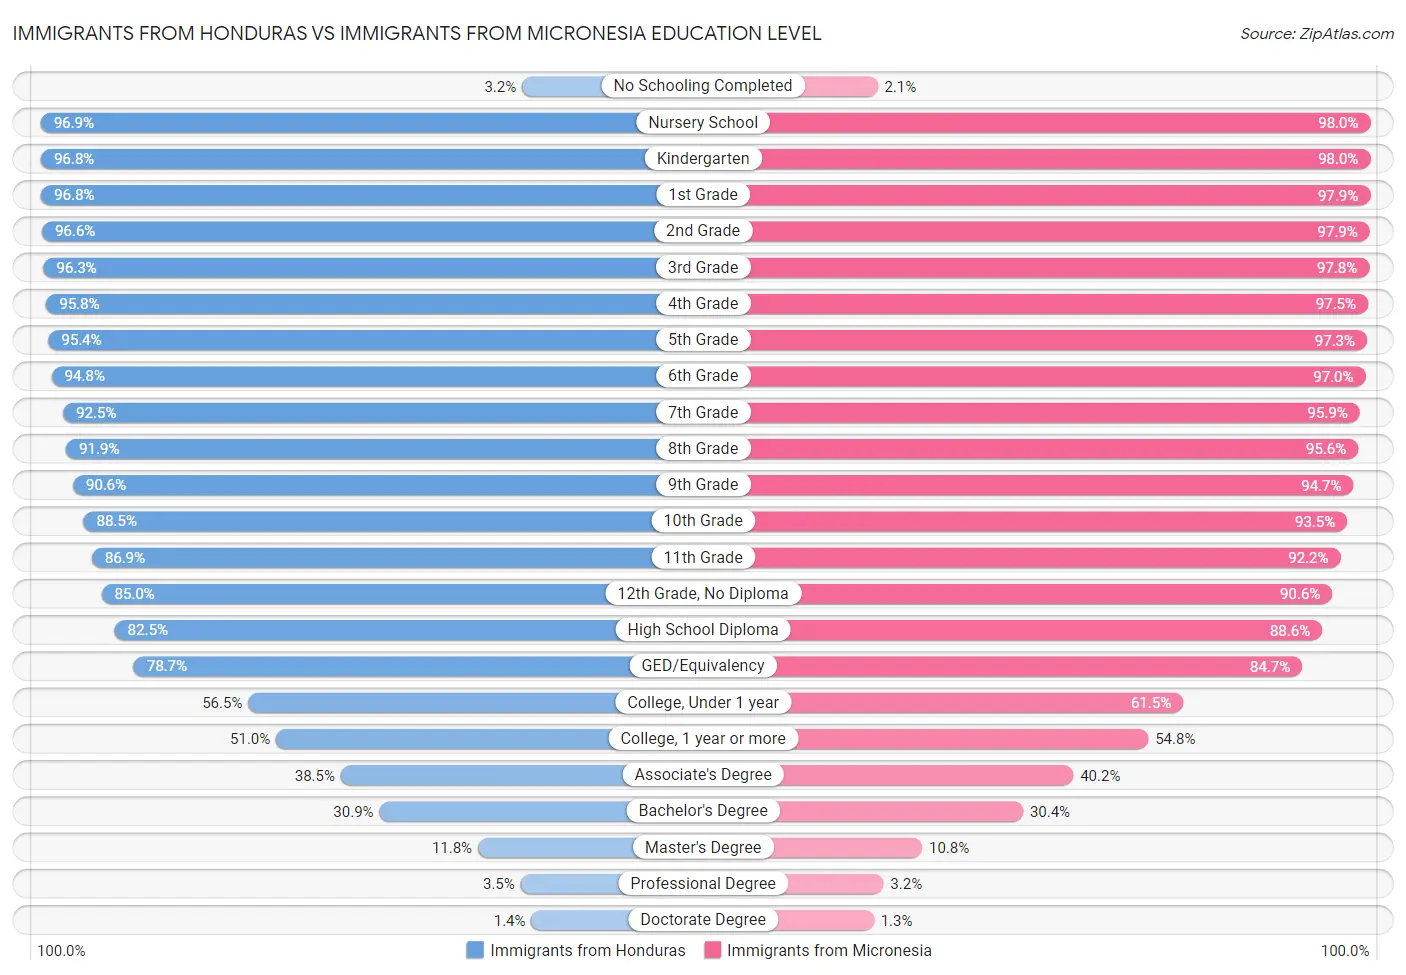 Immigrants from Honduras vs Immigrants from Micronesia Education Level